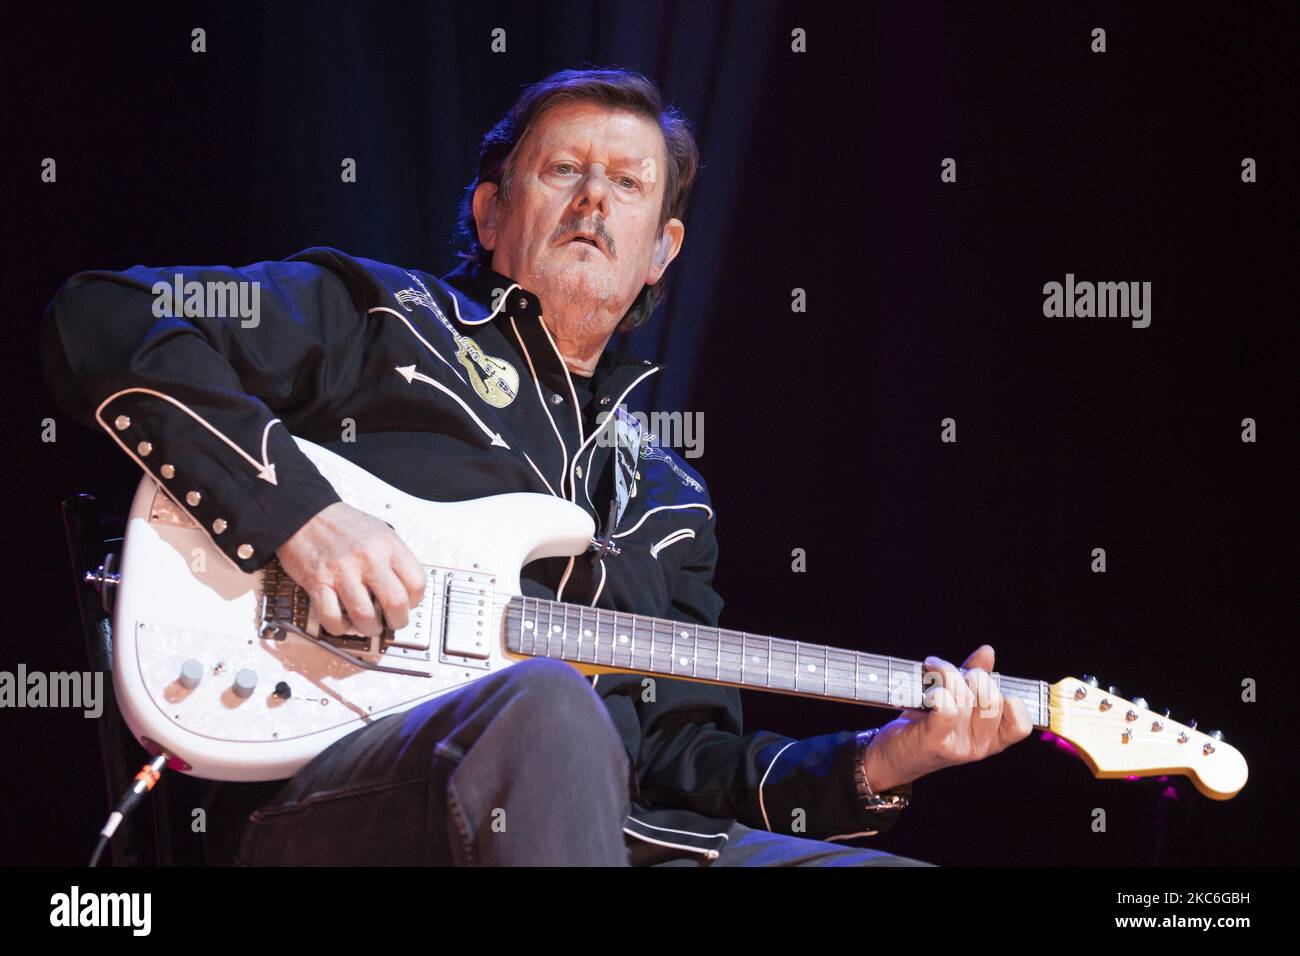 Ramo Arroyo of Spanish music band Los Secretos performs during the band's concert at Nuevo Alcala theater in Madrid, Spain, 26 December 2020 (Photo by Oscar Gonzalez/NurPhoto) Stock Photo